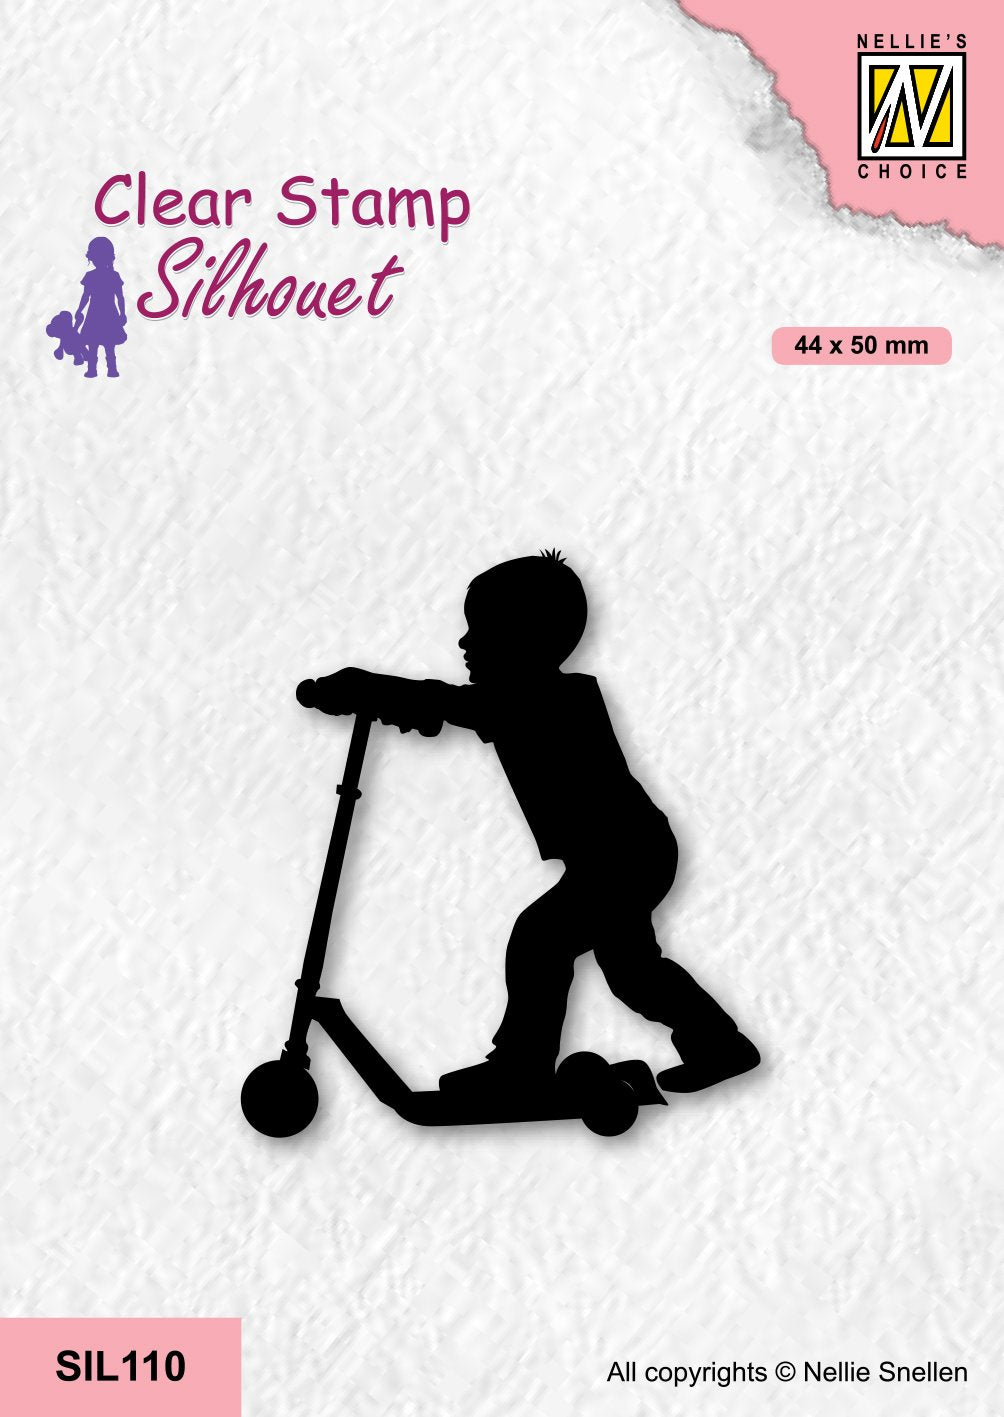 Nellie's Choice Clear Stamp Silhouette - Boy With Scooter